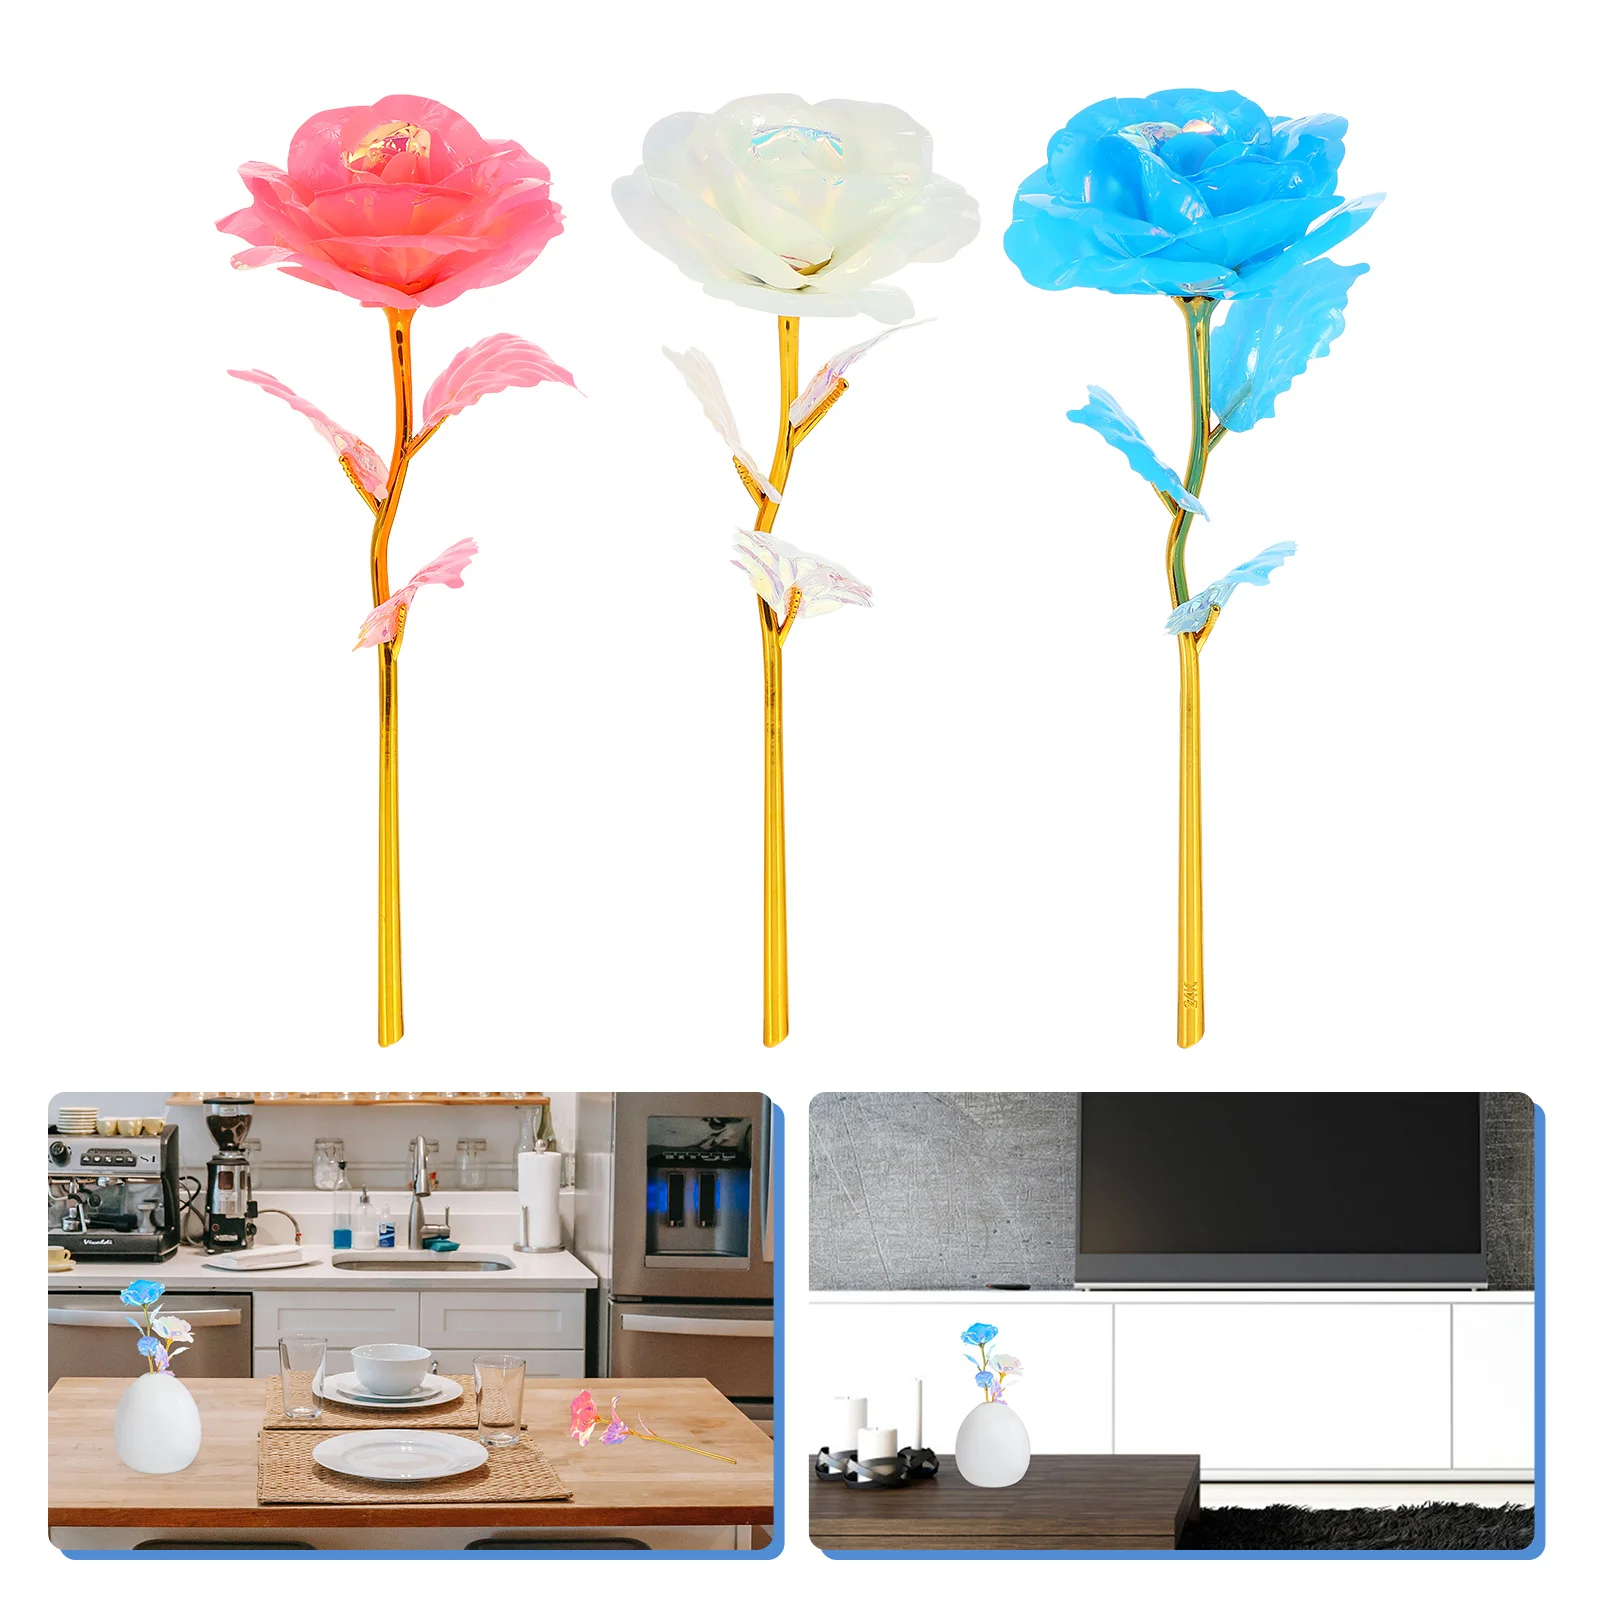 

Rose Luminous Fake Flower Artificial Flowers Stem Roses Glowing Stemswedding True Love Gifts Supplies Gift Day Colorfulmother